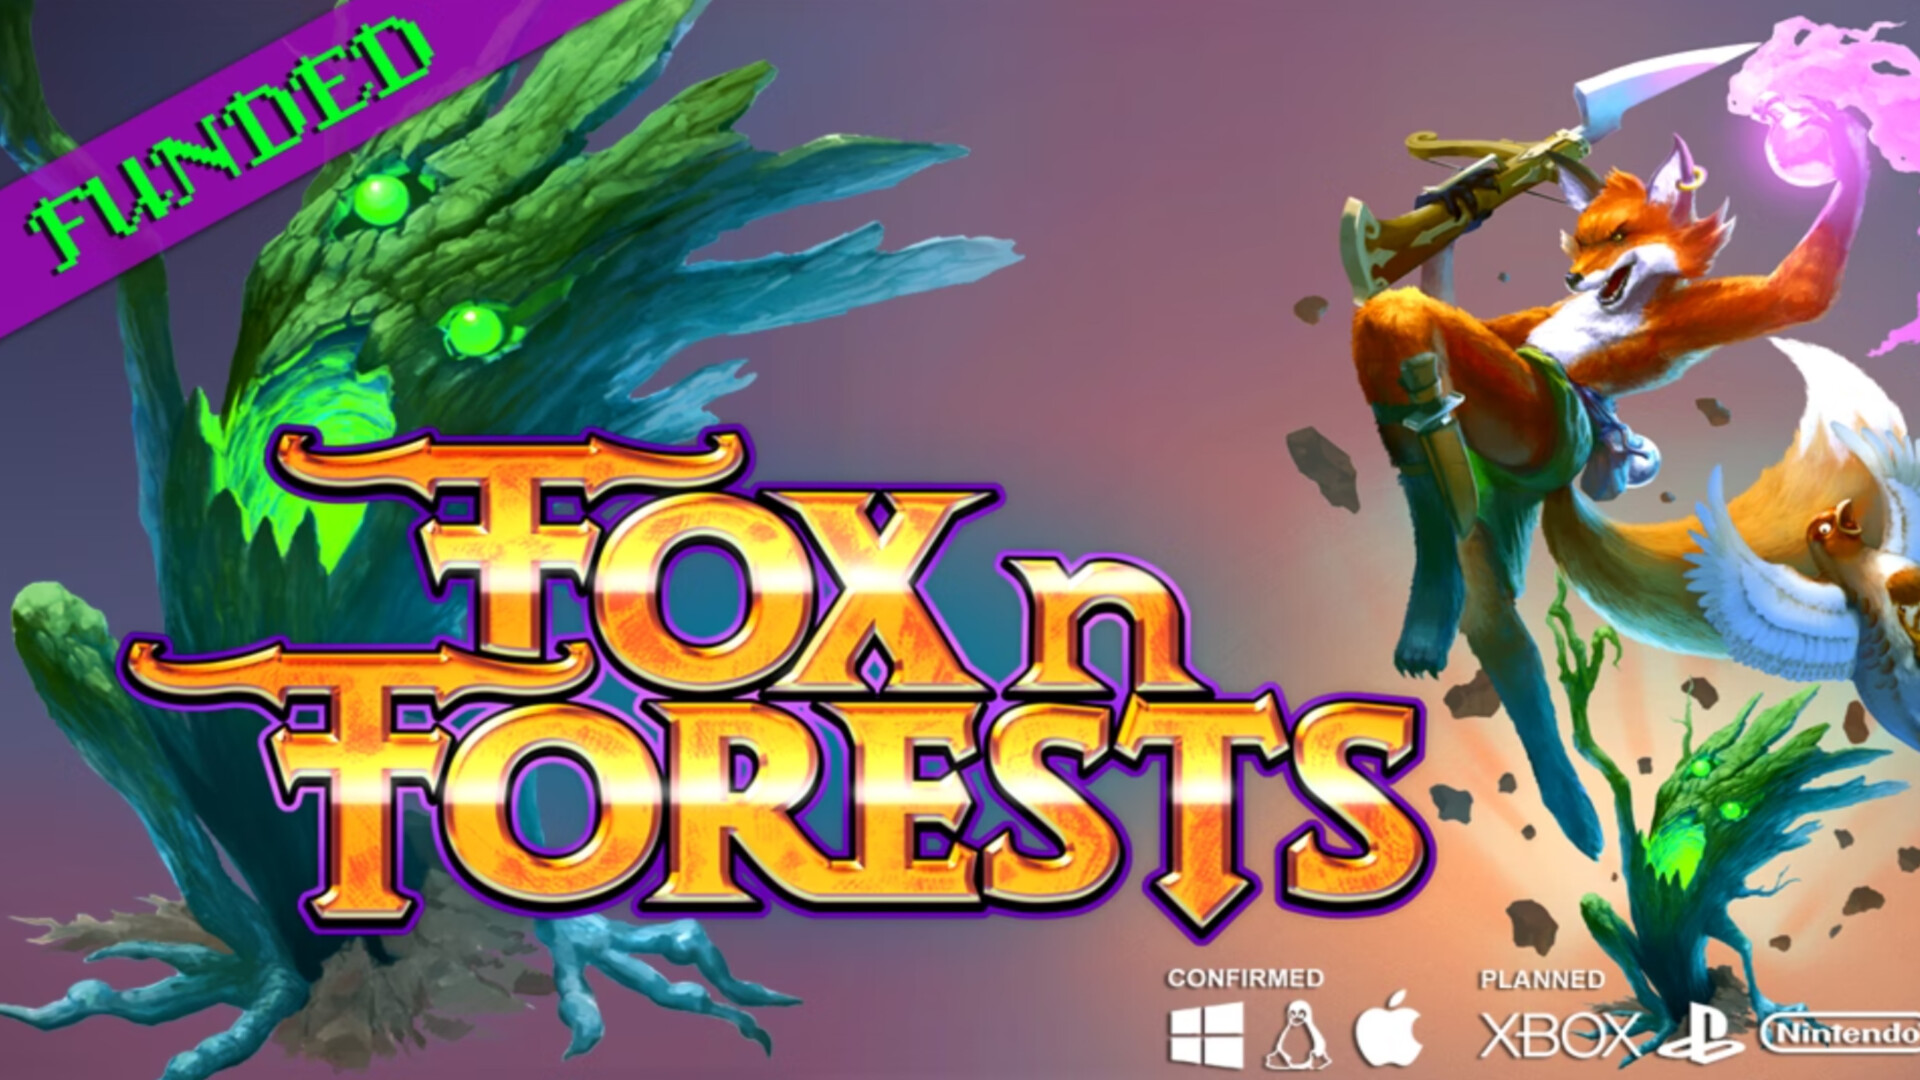 FOX n FORESTS gets physical